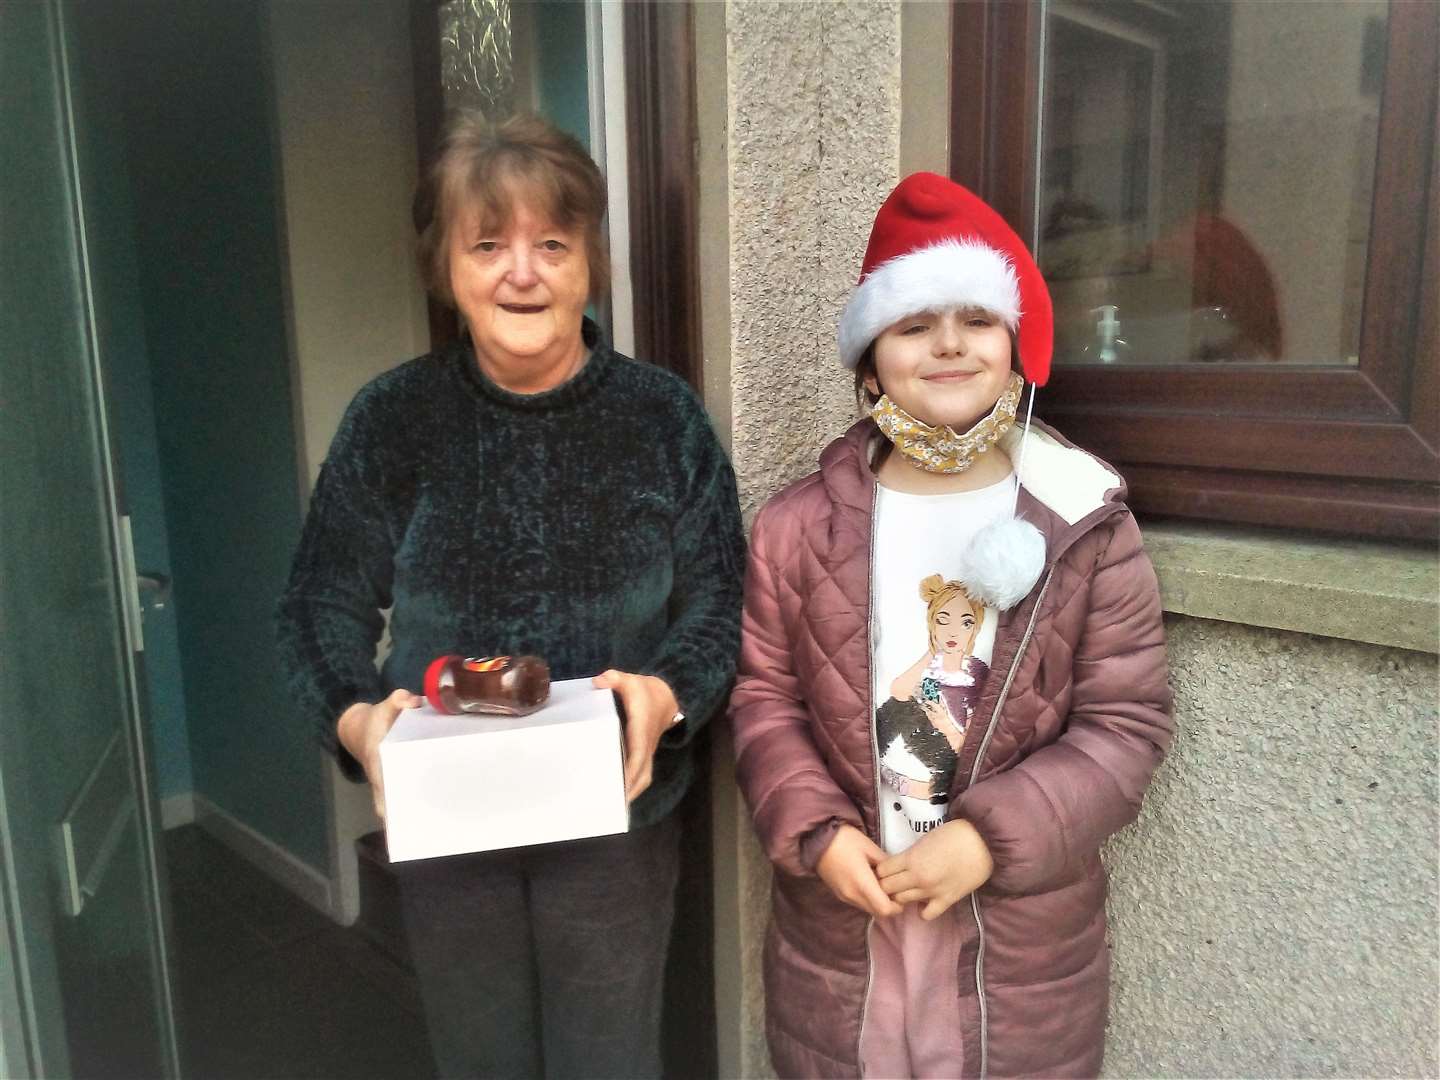 Janet Calder receives a hamper treat from nine-year-old Emily.